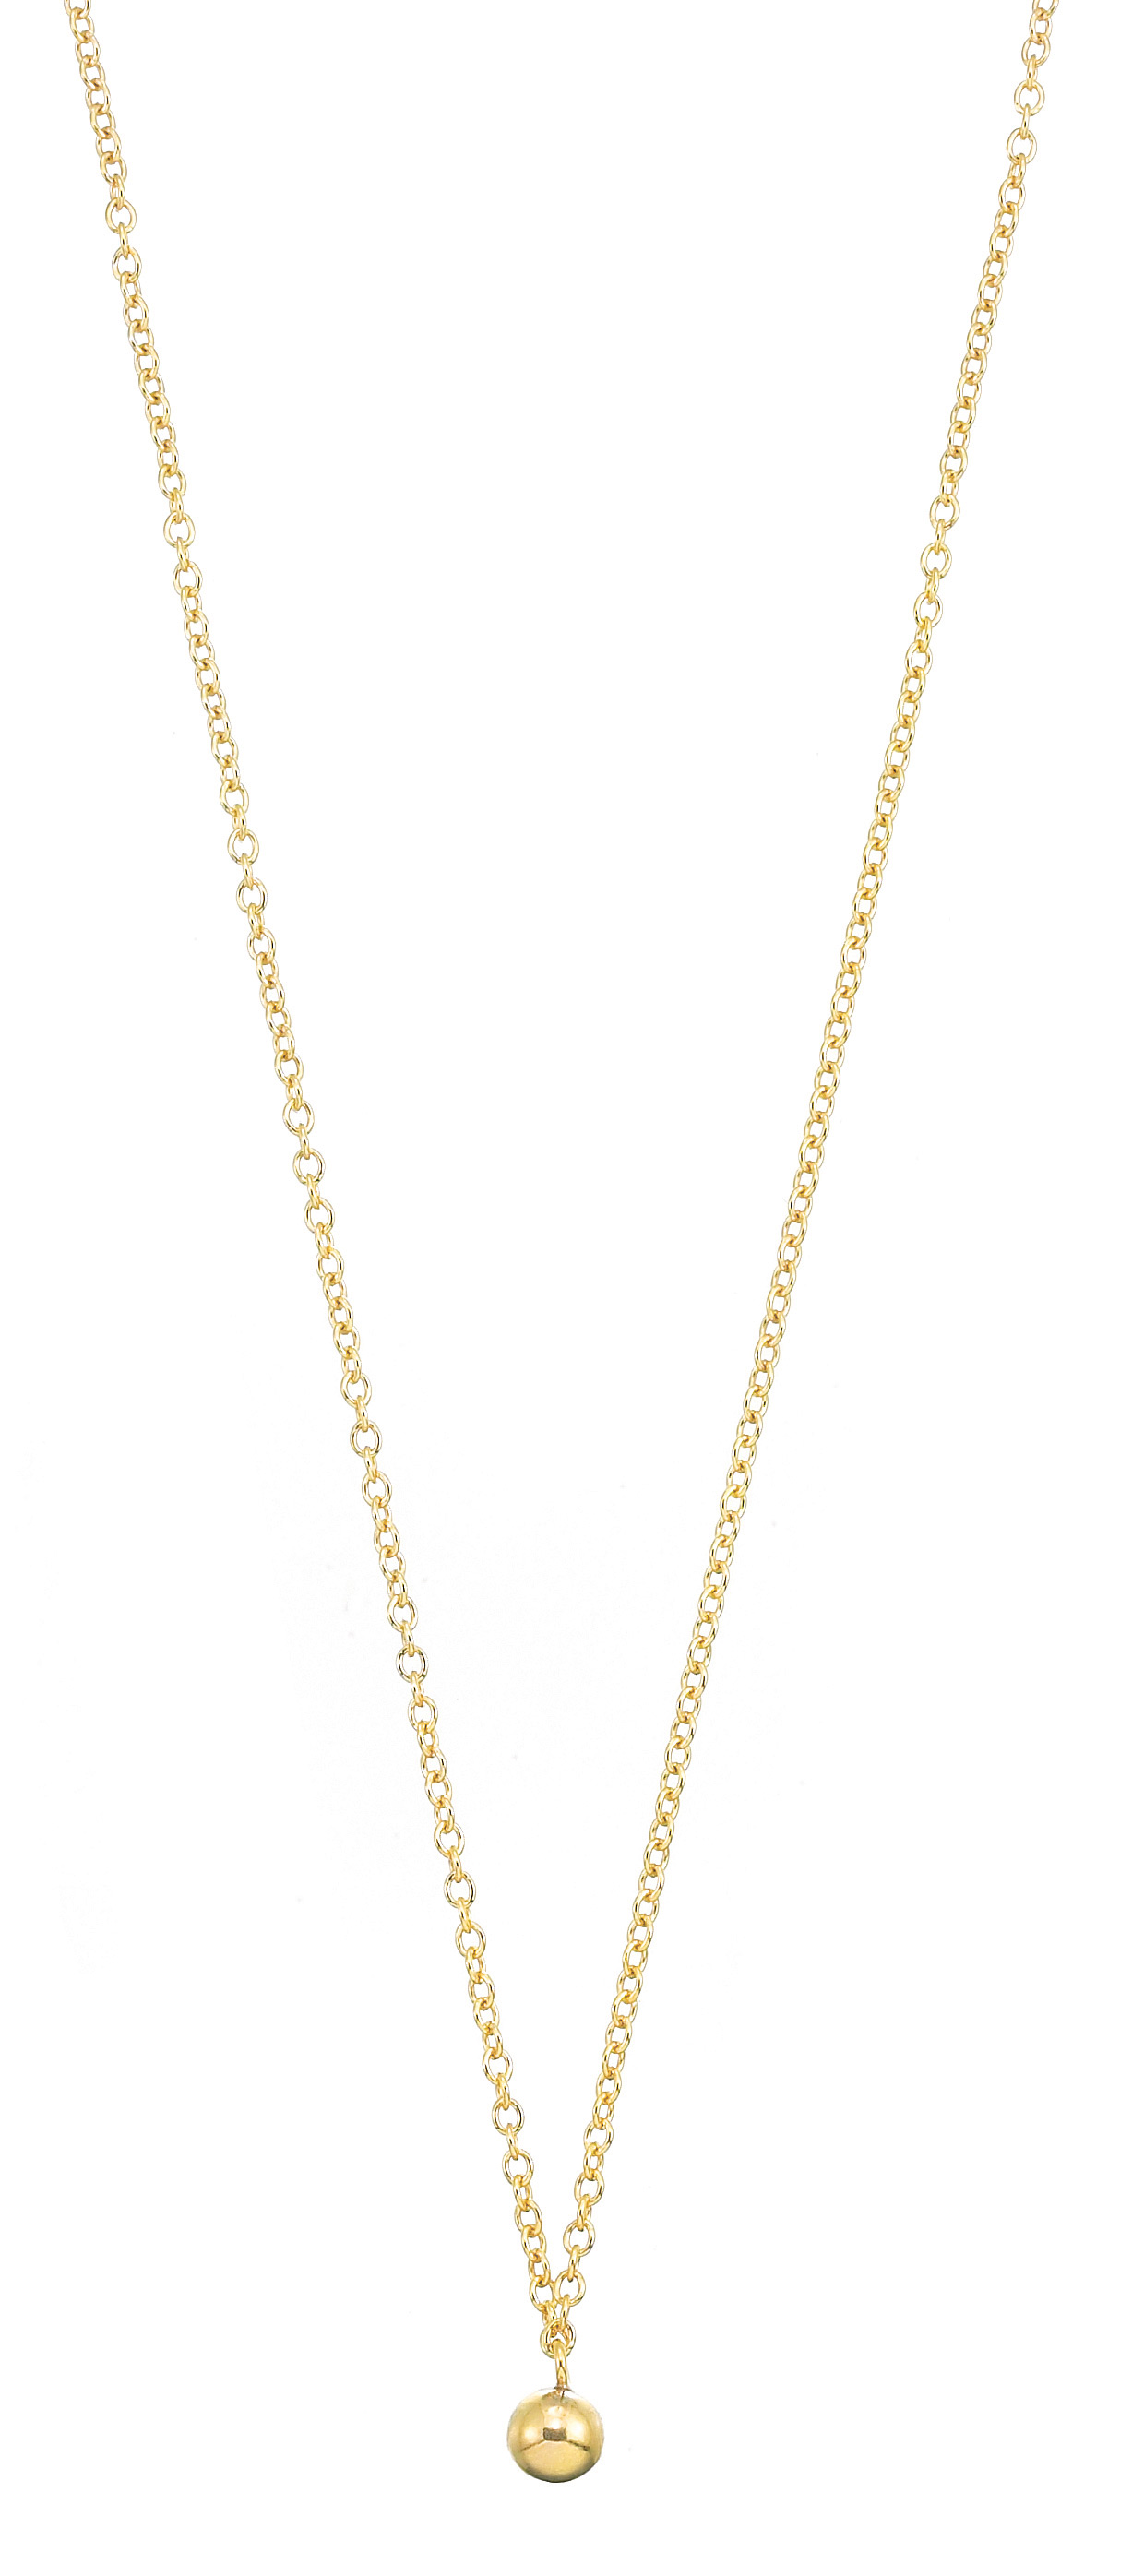 Lariat w/ Bead, No Clasp, Gold-Plated, 32.0 in